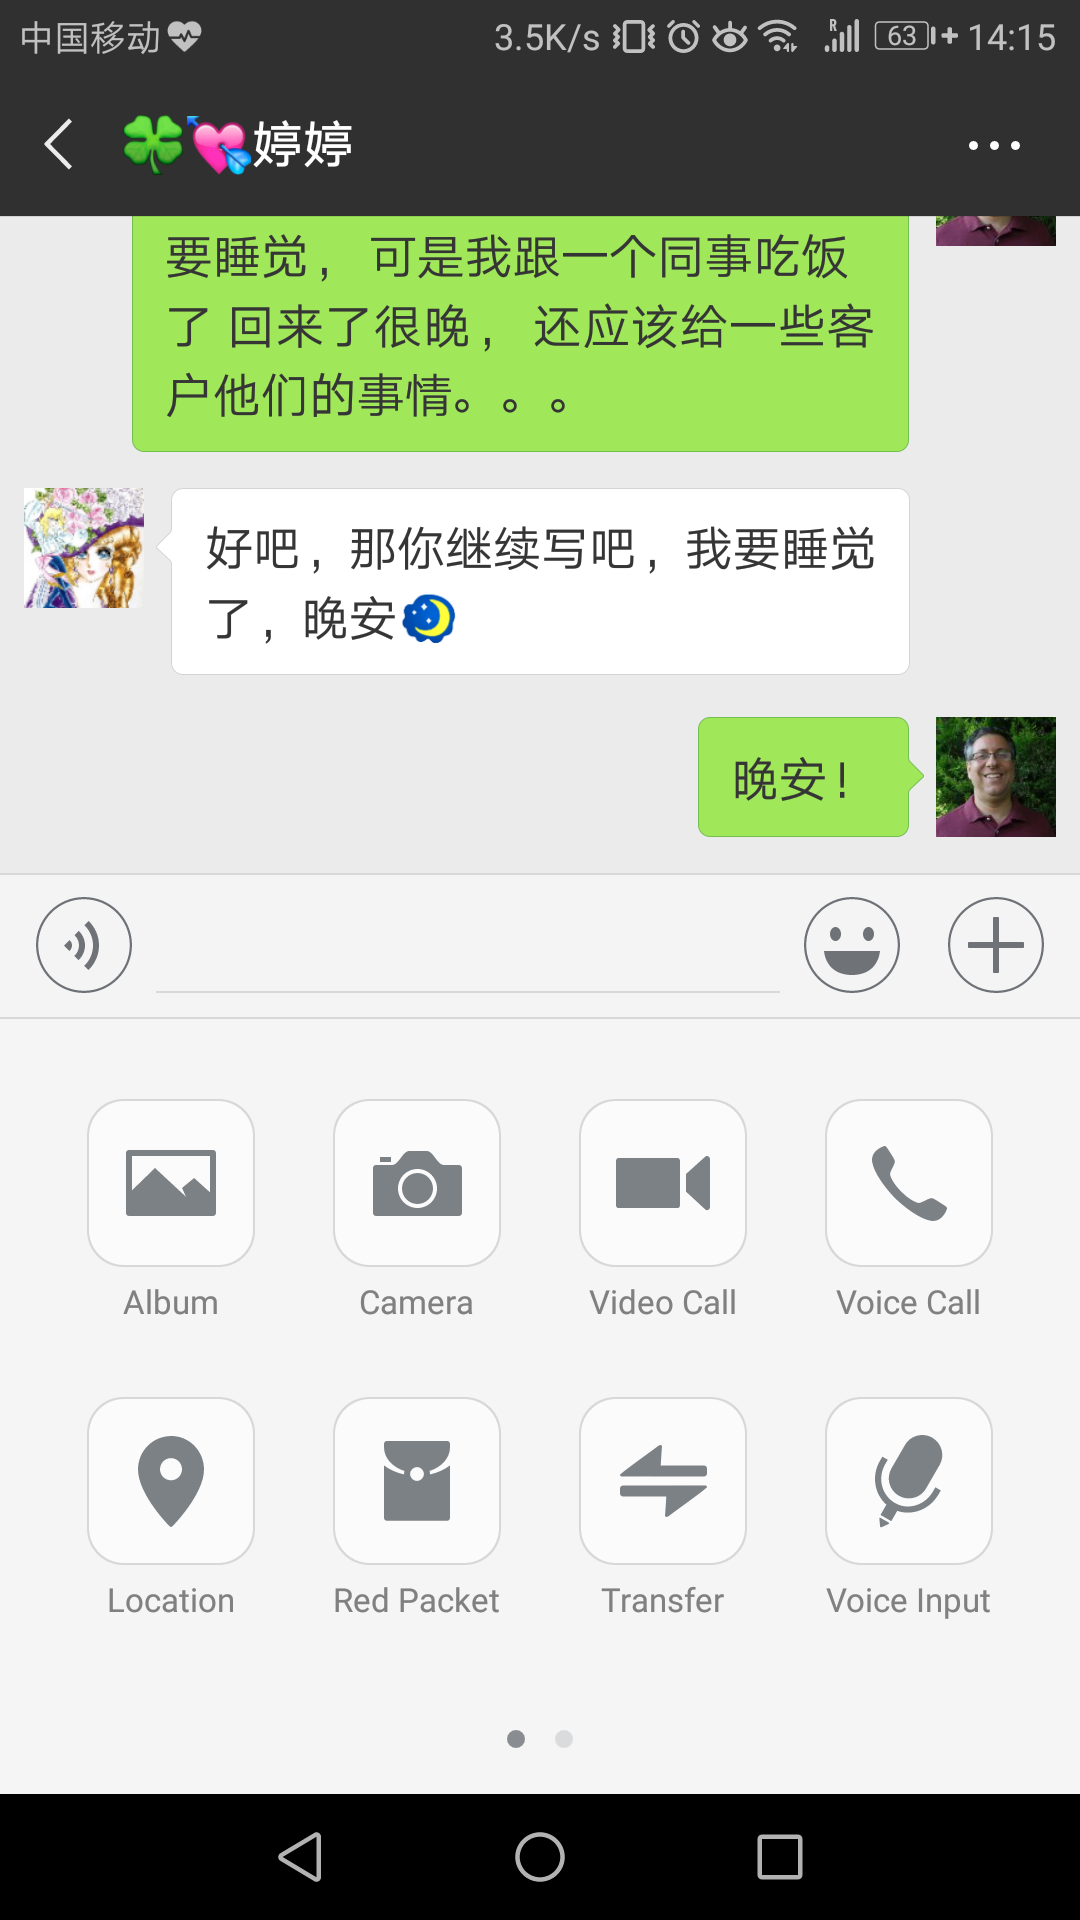 The Foreigner's Guide To Wechat Payments In China Reuven Lerner. 